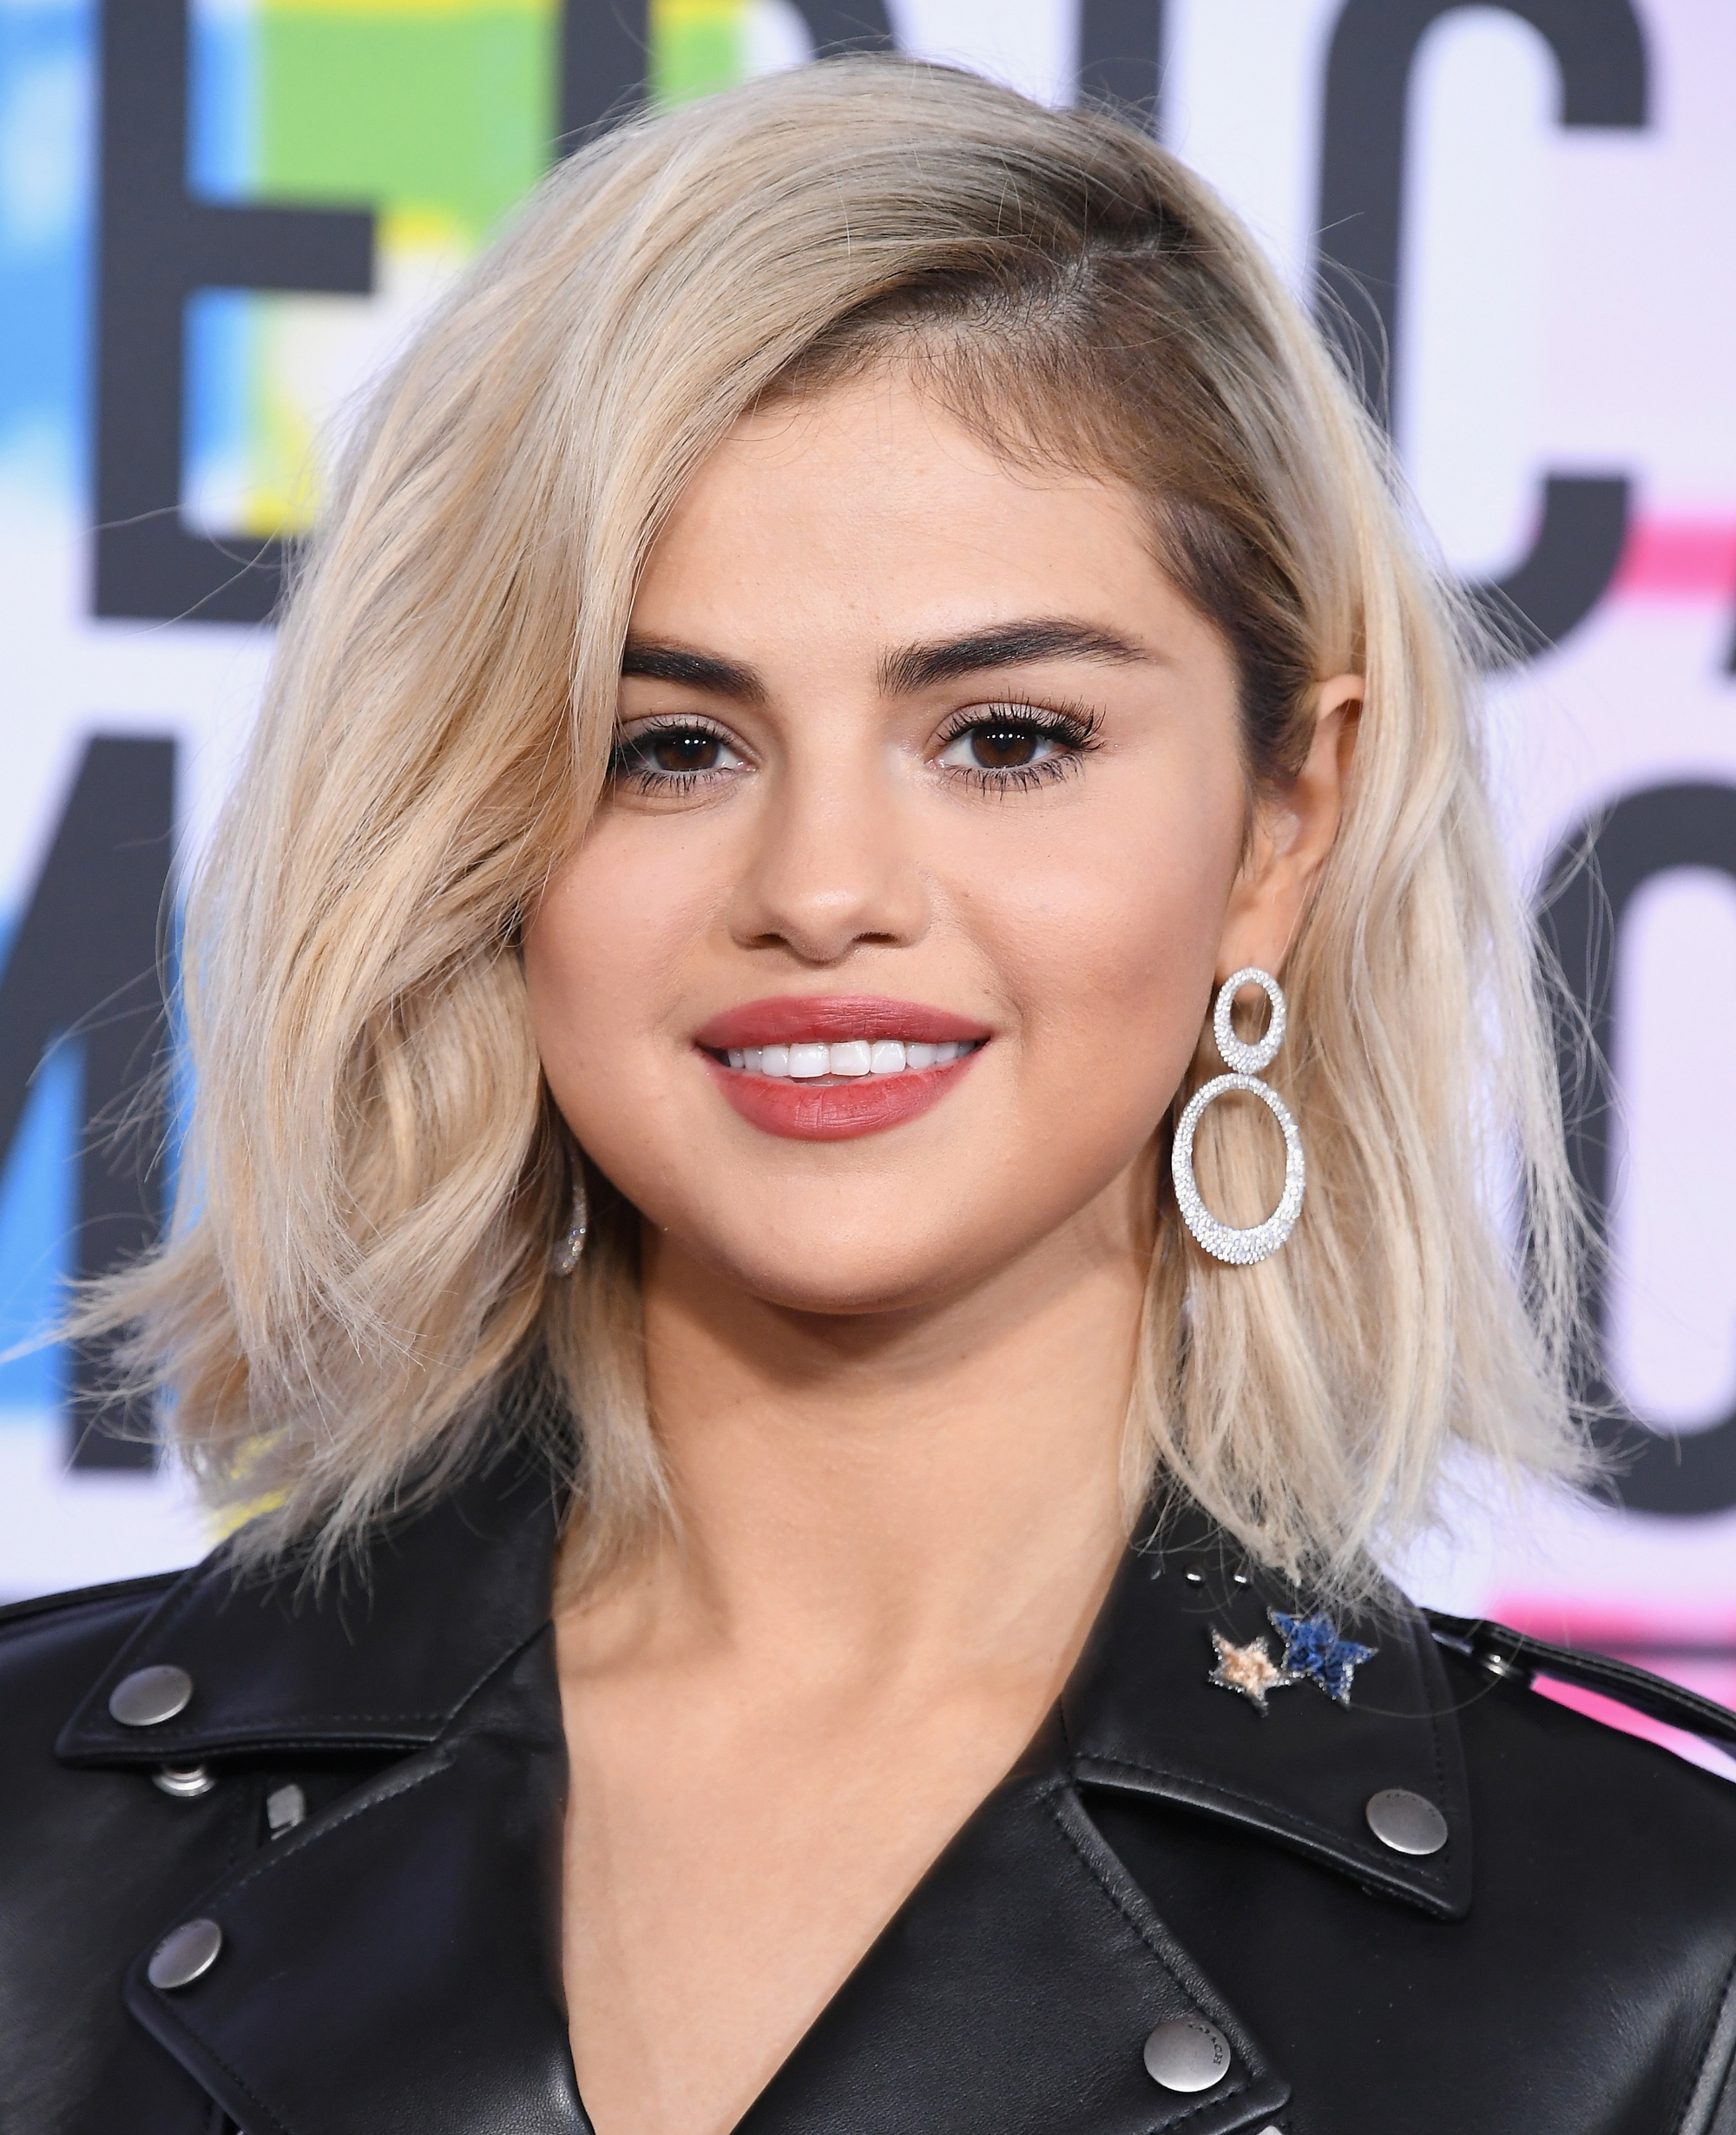 How to Get Selena Gomez's Blonde Hair Color | InStyle.com